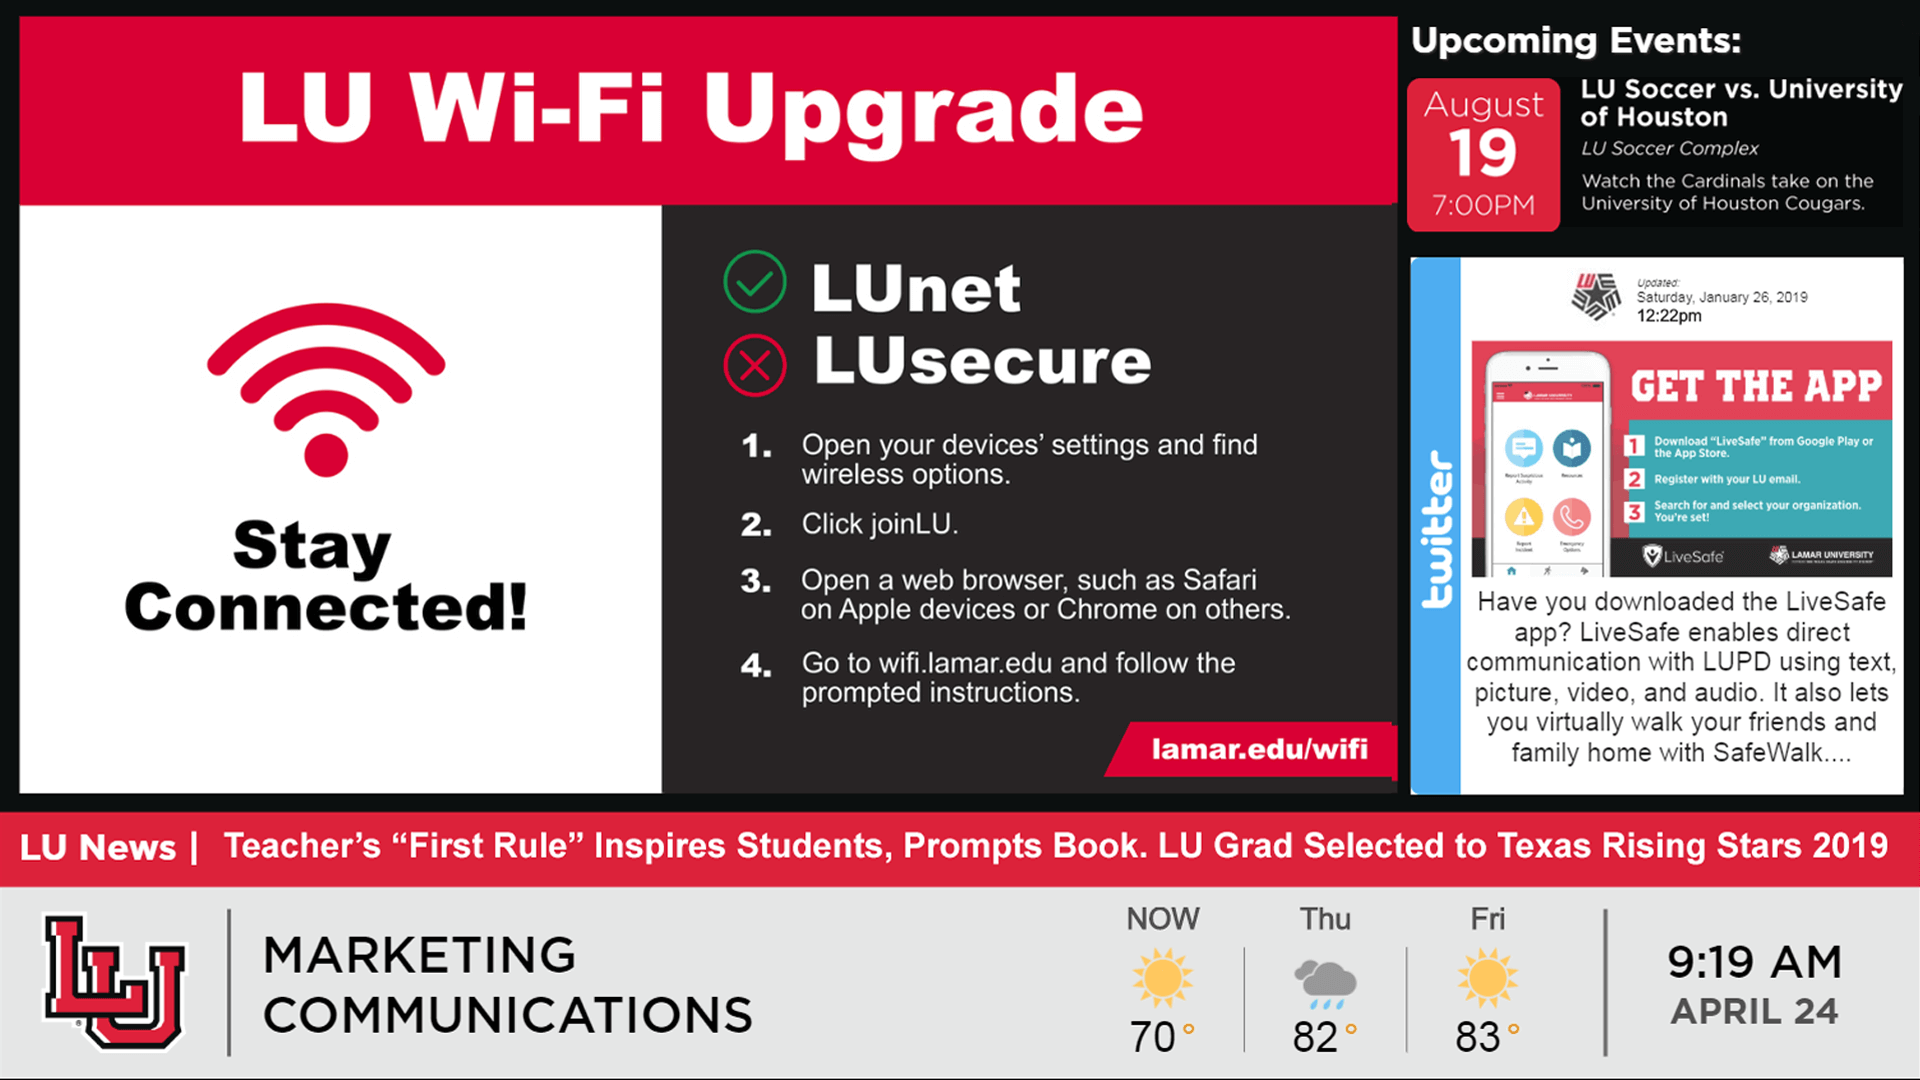 Red digital signage displaying wifi information, upcoming events, and weather for Lamar University